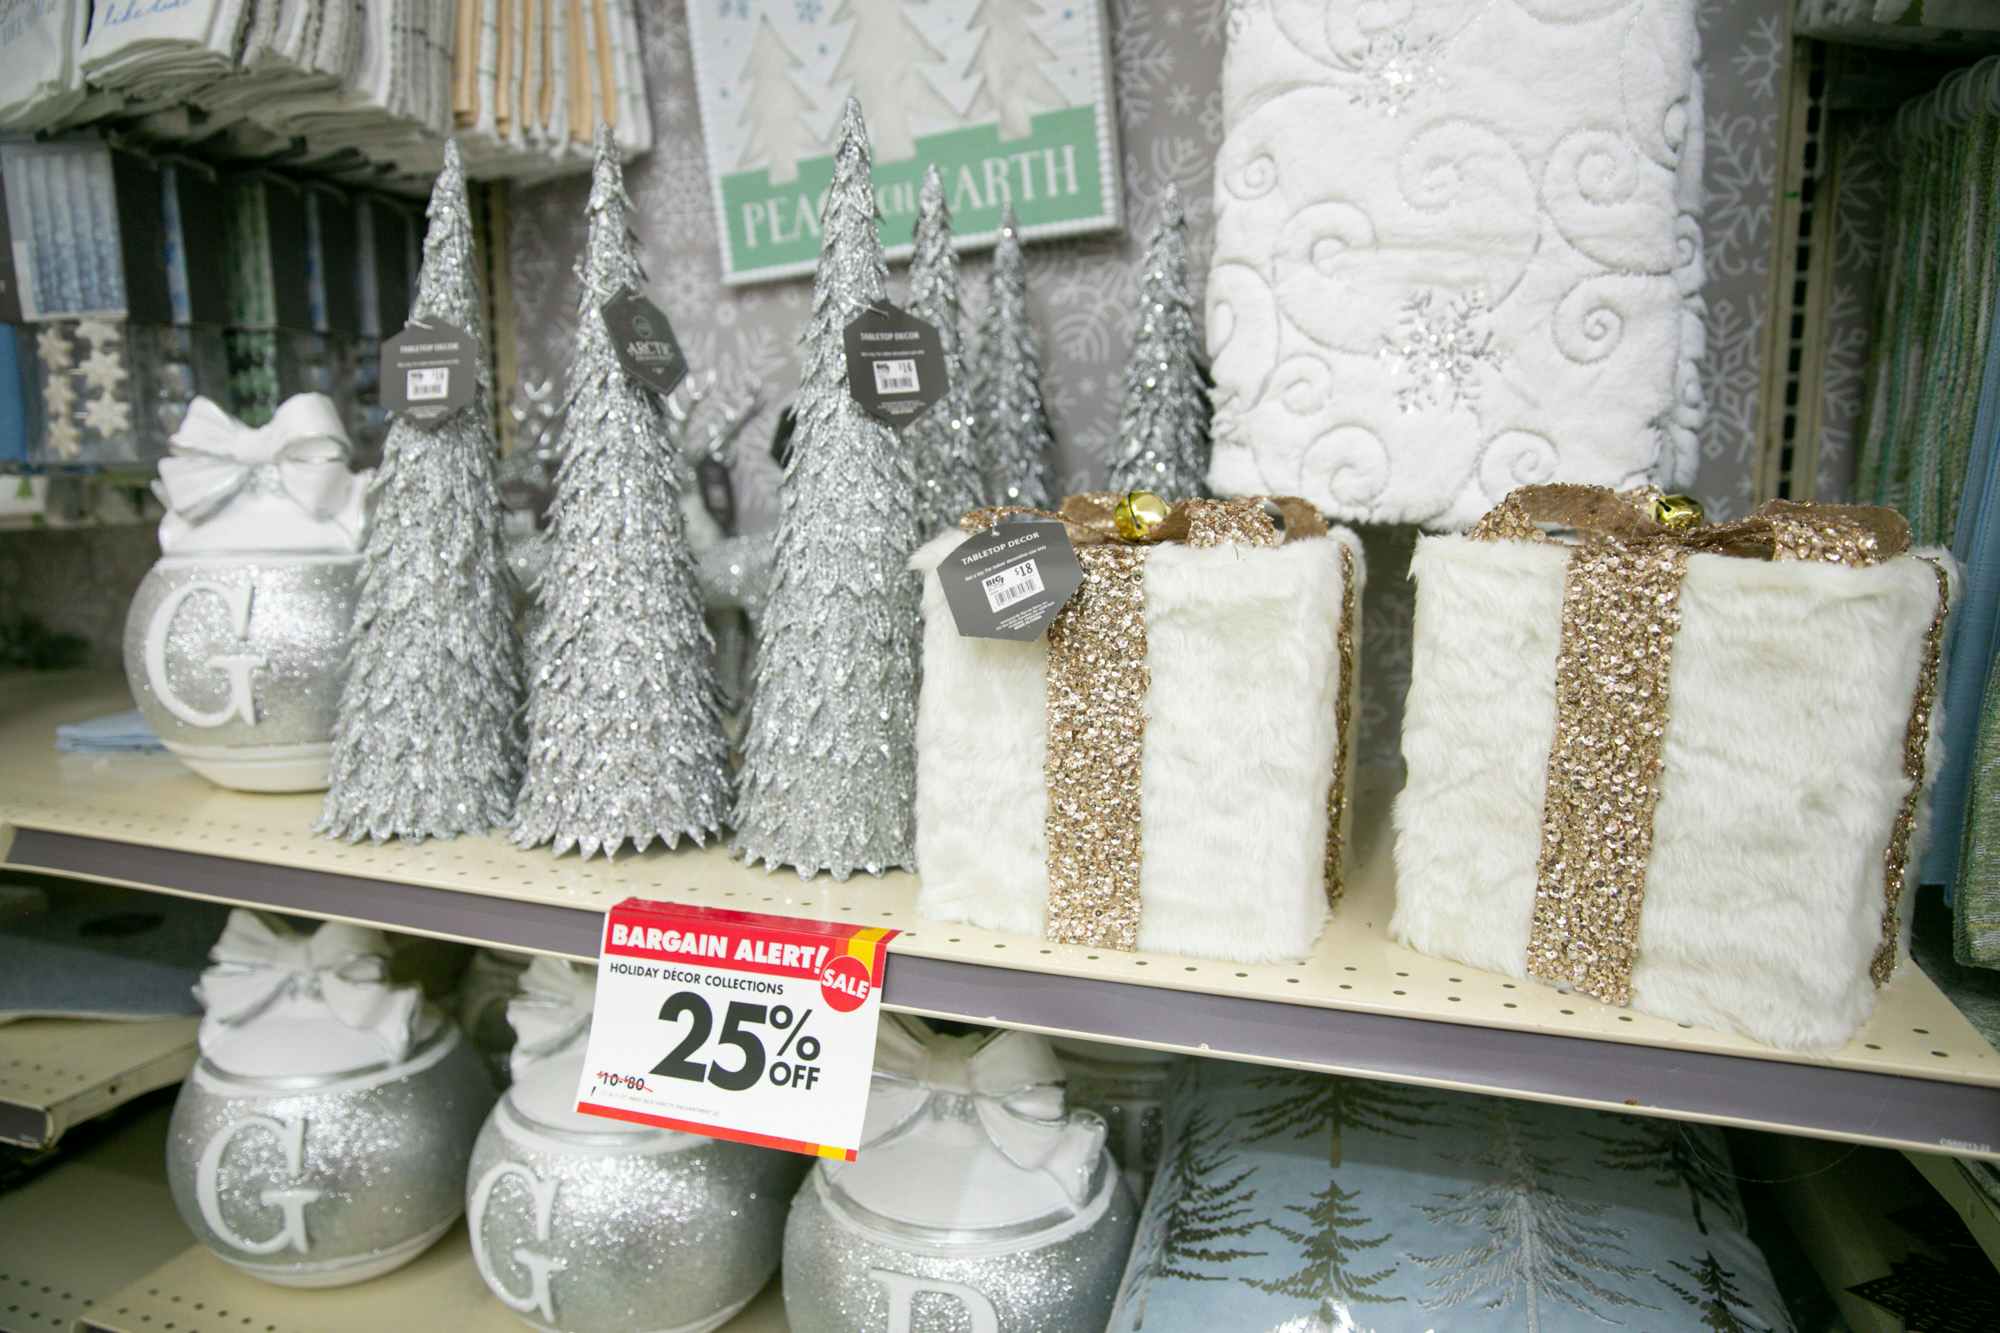 White Christmas decorations inside a Big Lots store